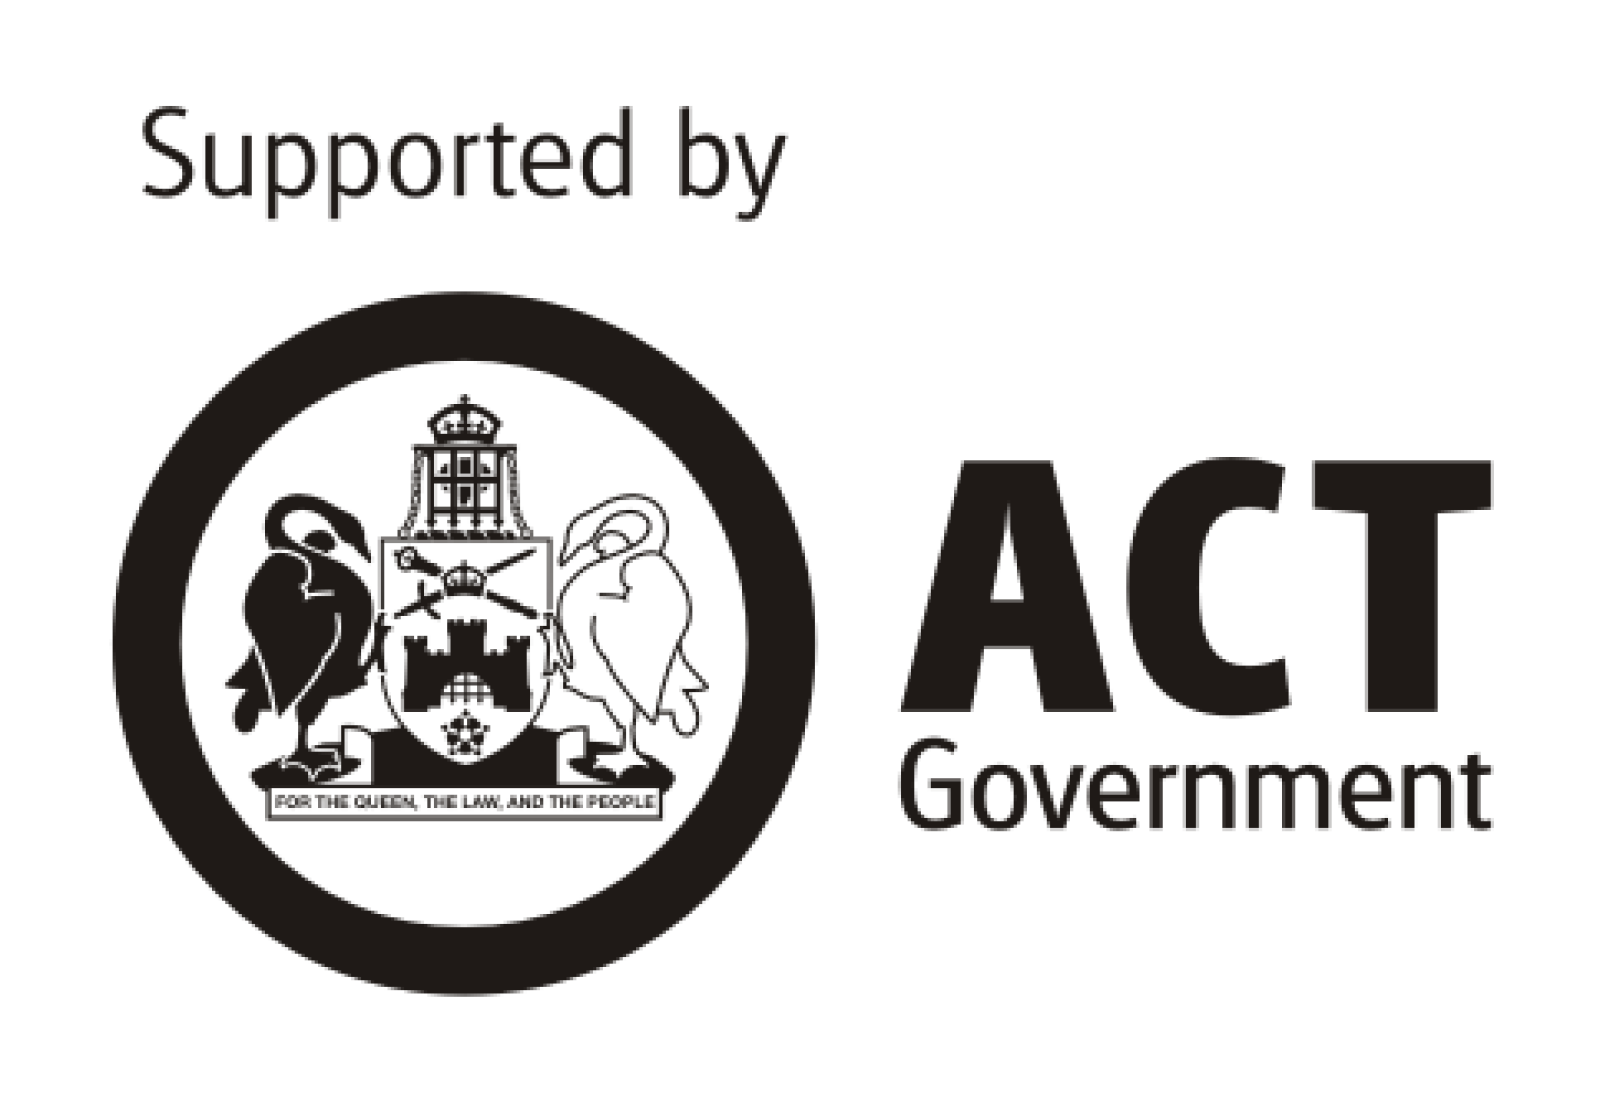 Supported by ACTGovt